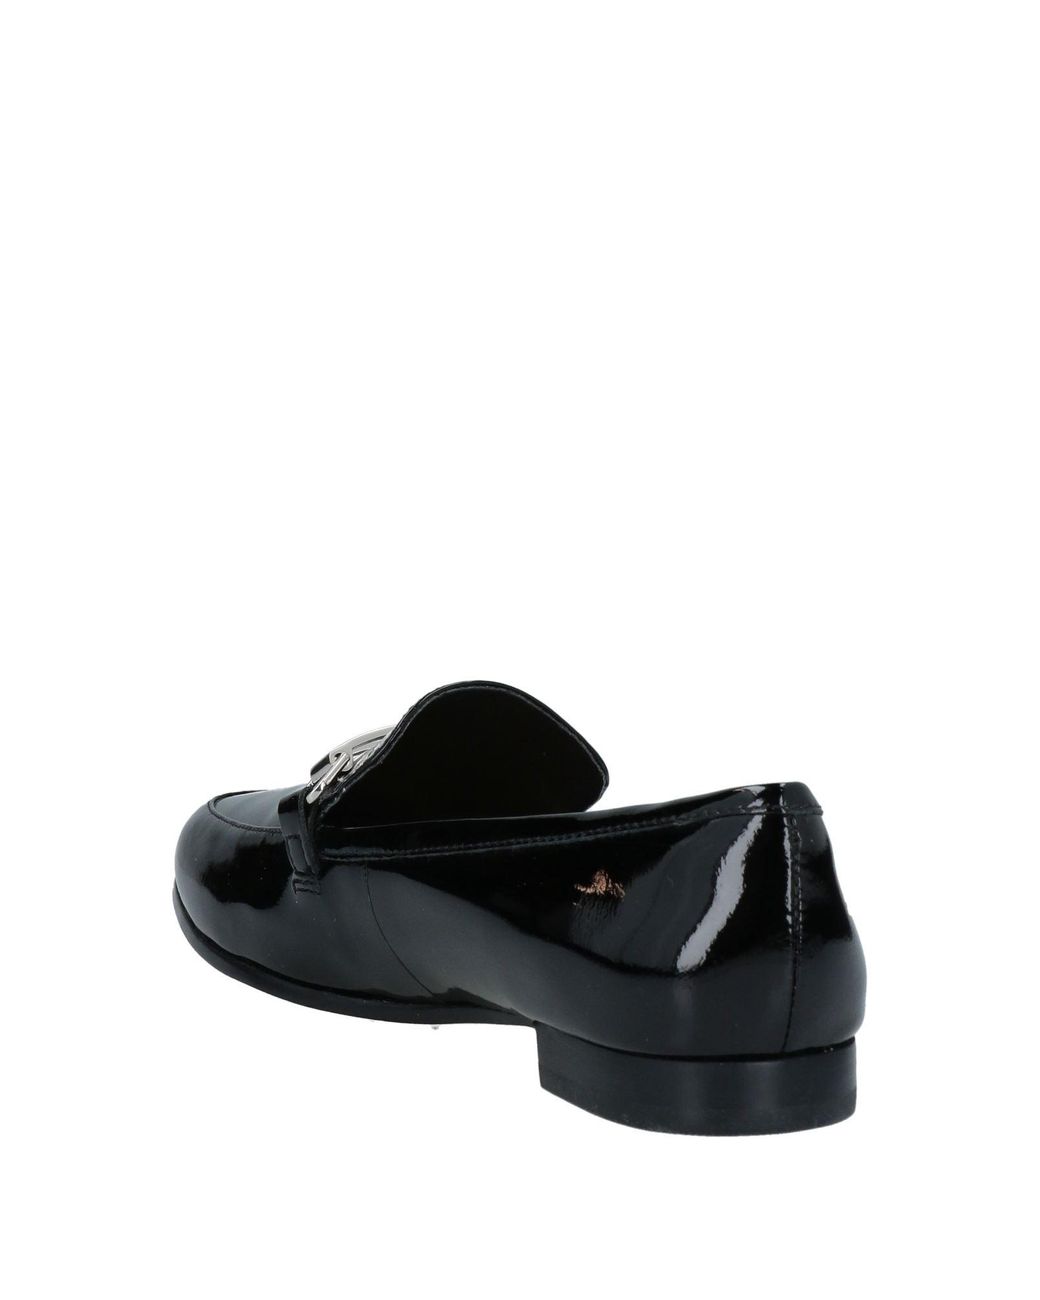 DKNY Loafers in Black | Lyst